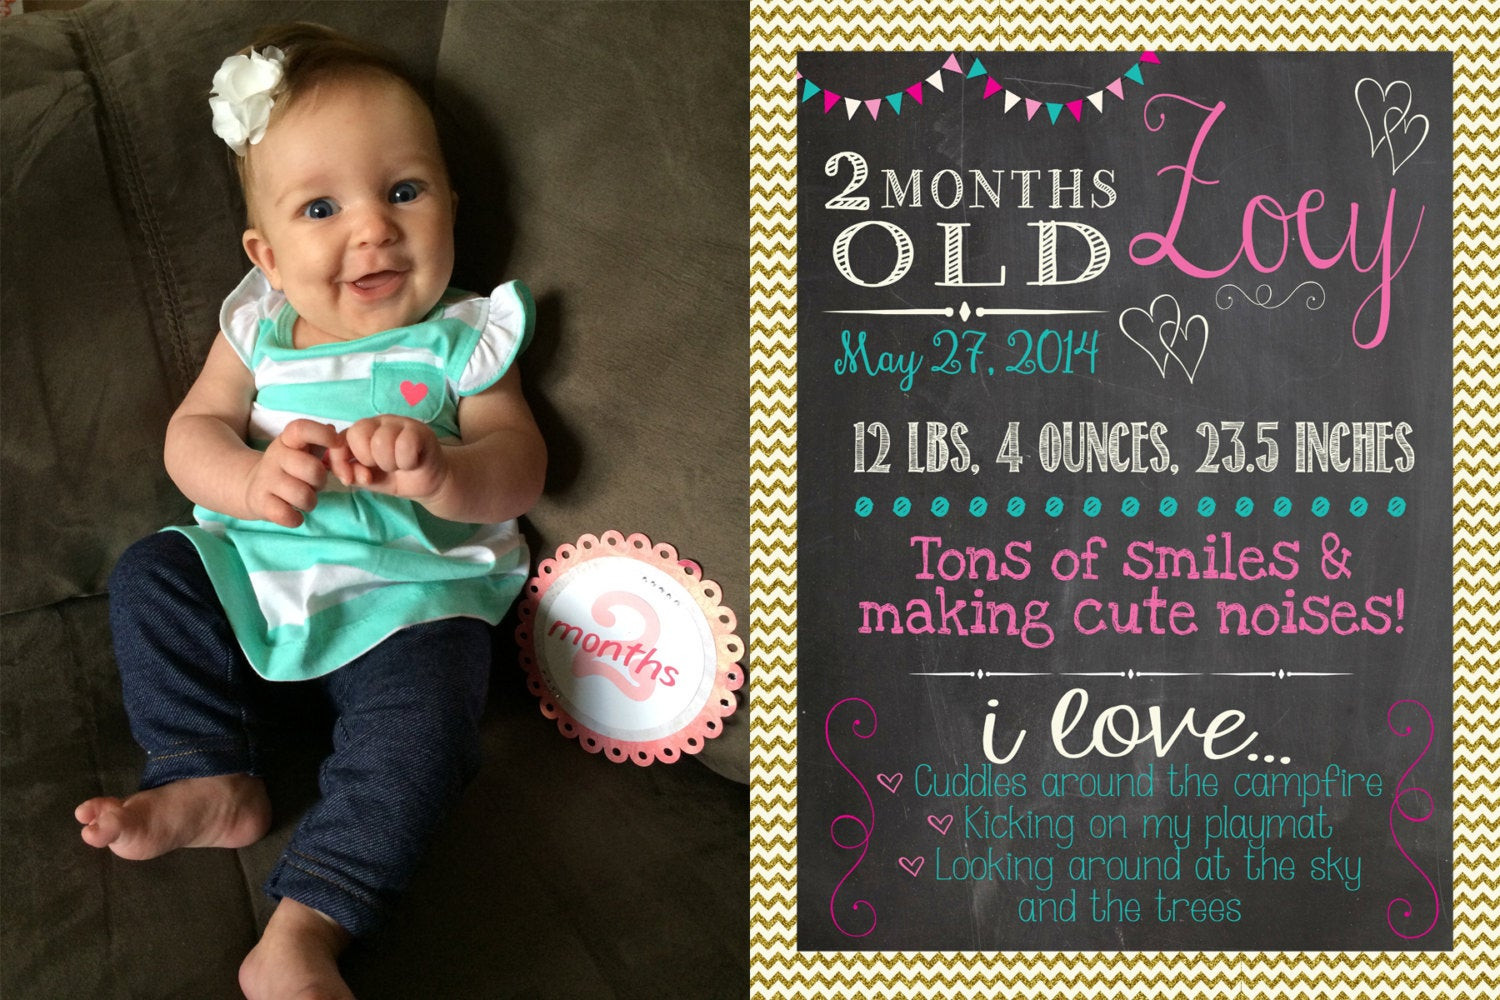 4 Months Old Baby Quotes
 Monthly Baby Milestones Prop Bundle for 12 Months